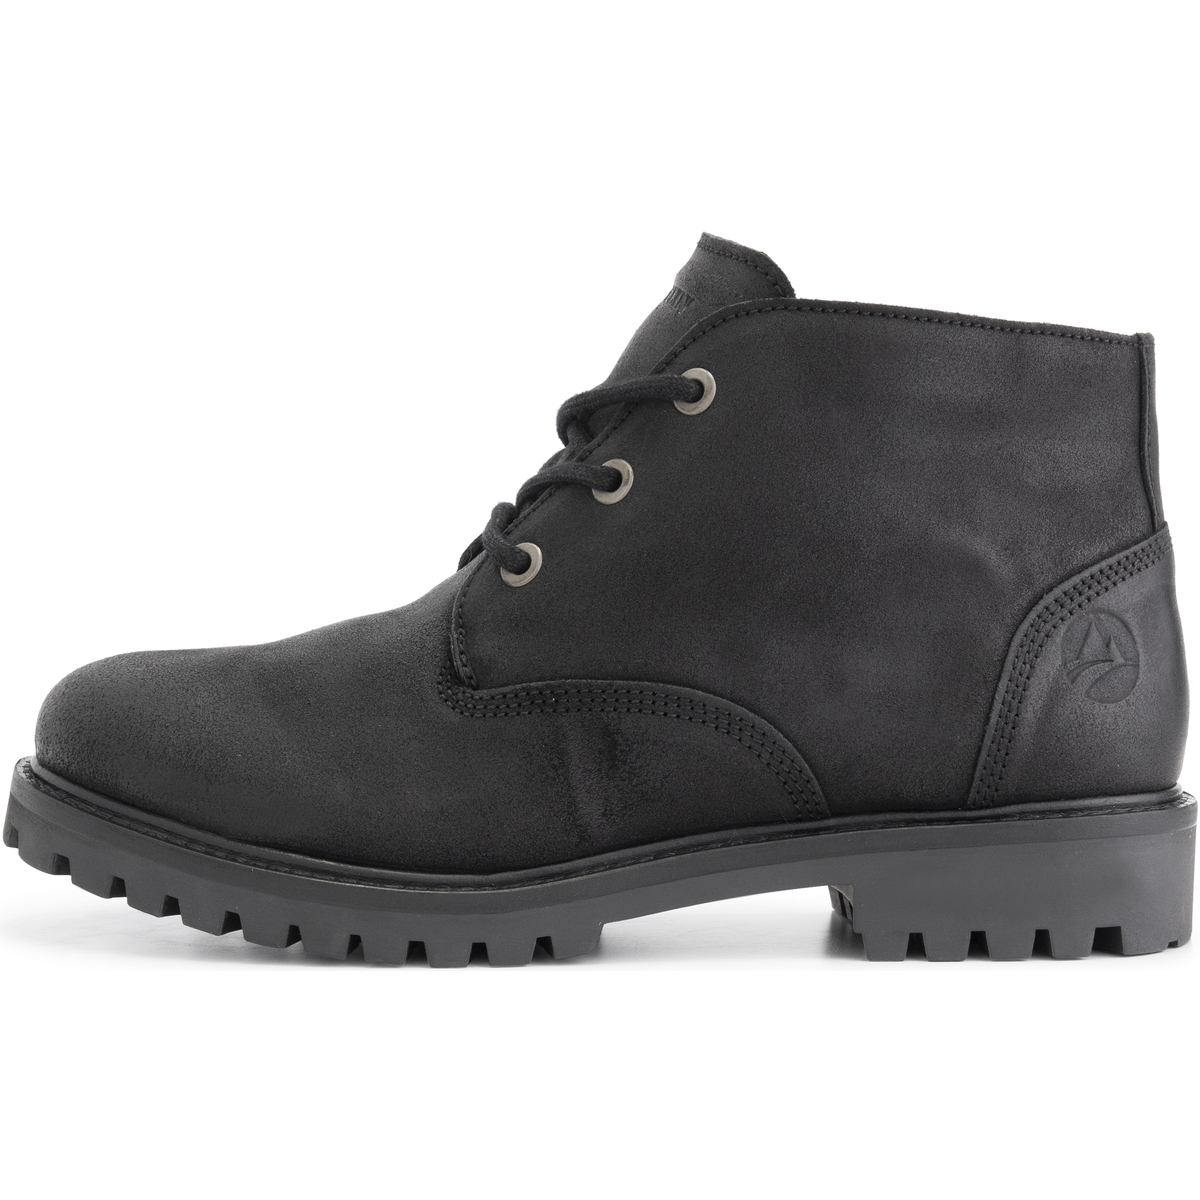 Chaussures Homme 9566Z Boots Travelin' Thorning Noir